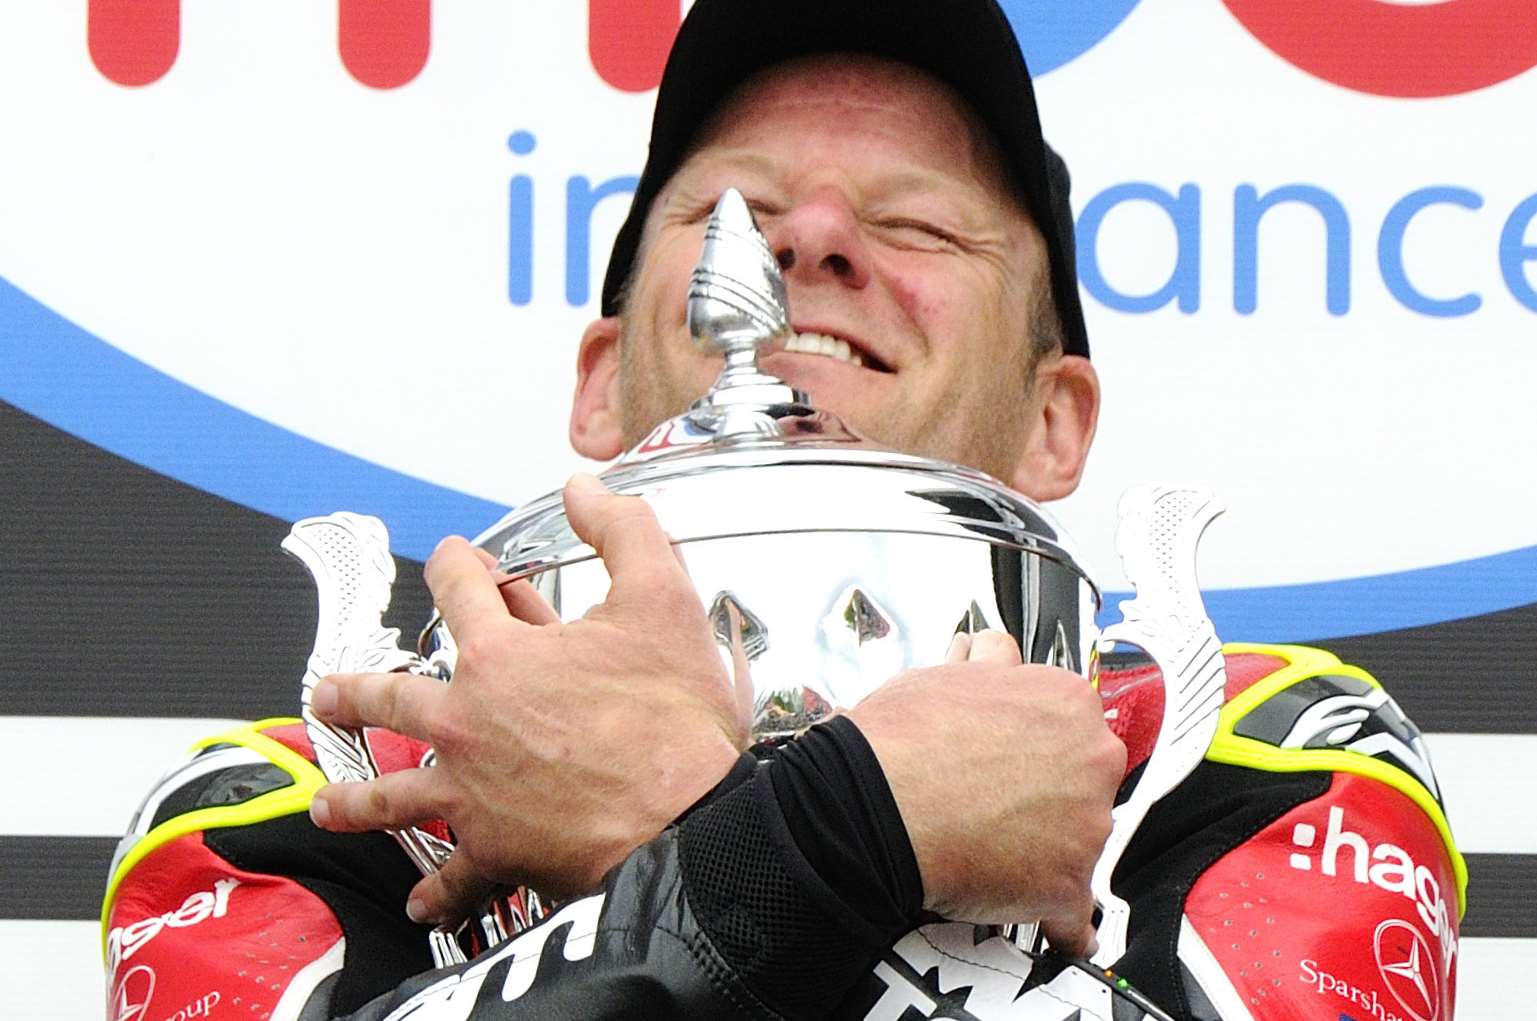 Sittingbourne's Shane Byrne celebrates his win in race two at Brands Hatch in the British Superbike Championship. Picture: Simon Hildrew